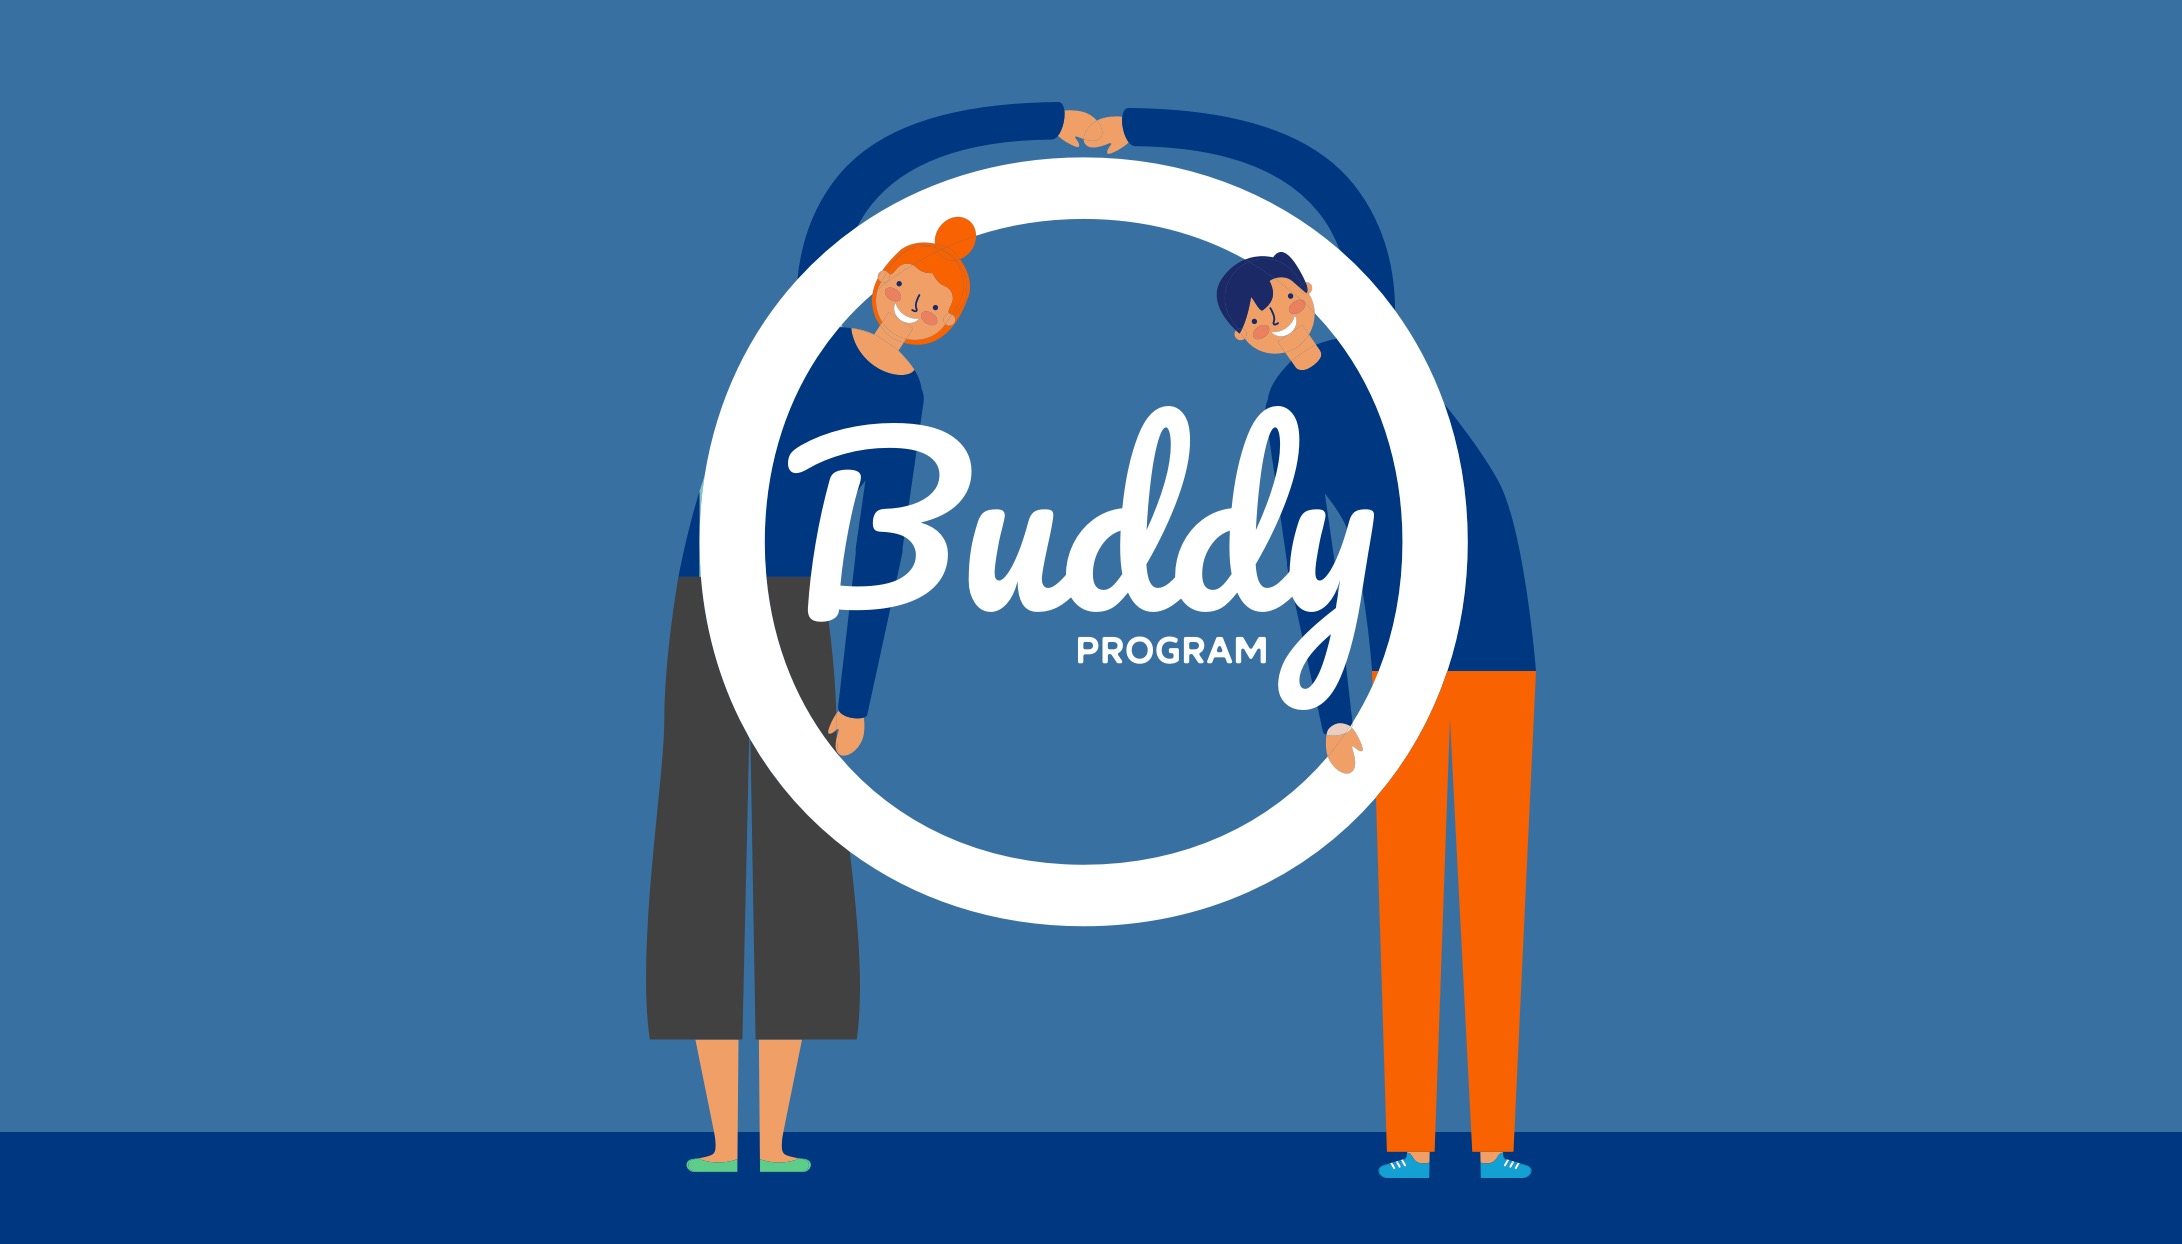 Buddy Program Logo showing two illustrated persons forming a circle